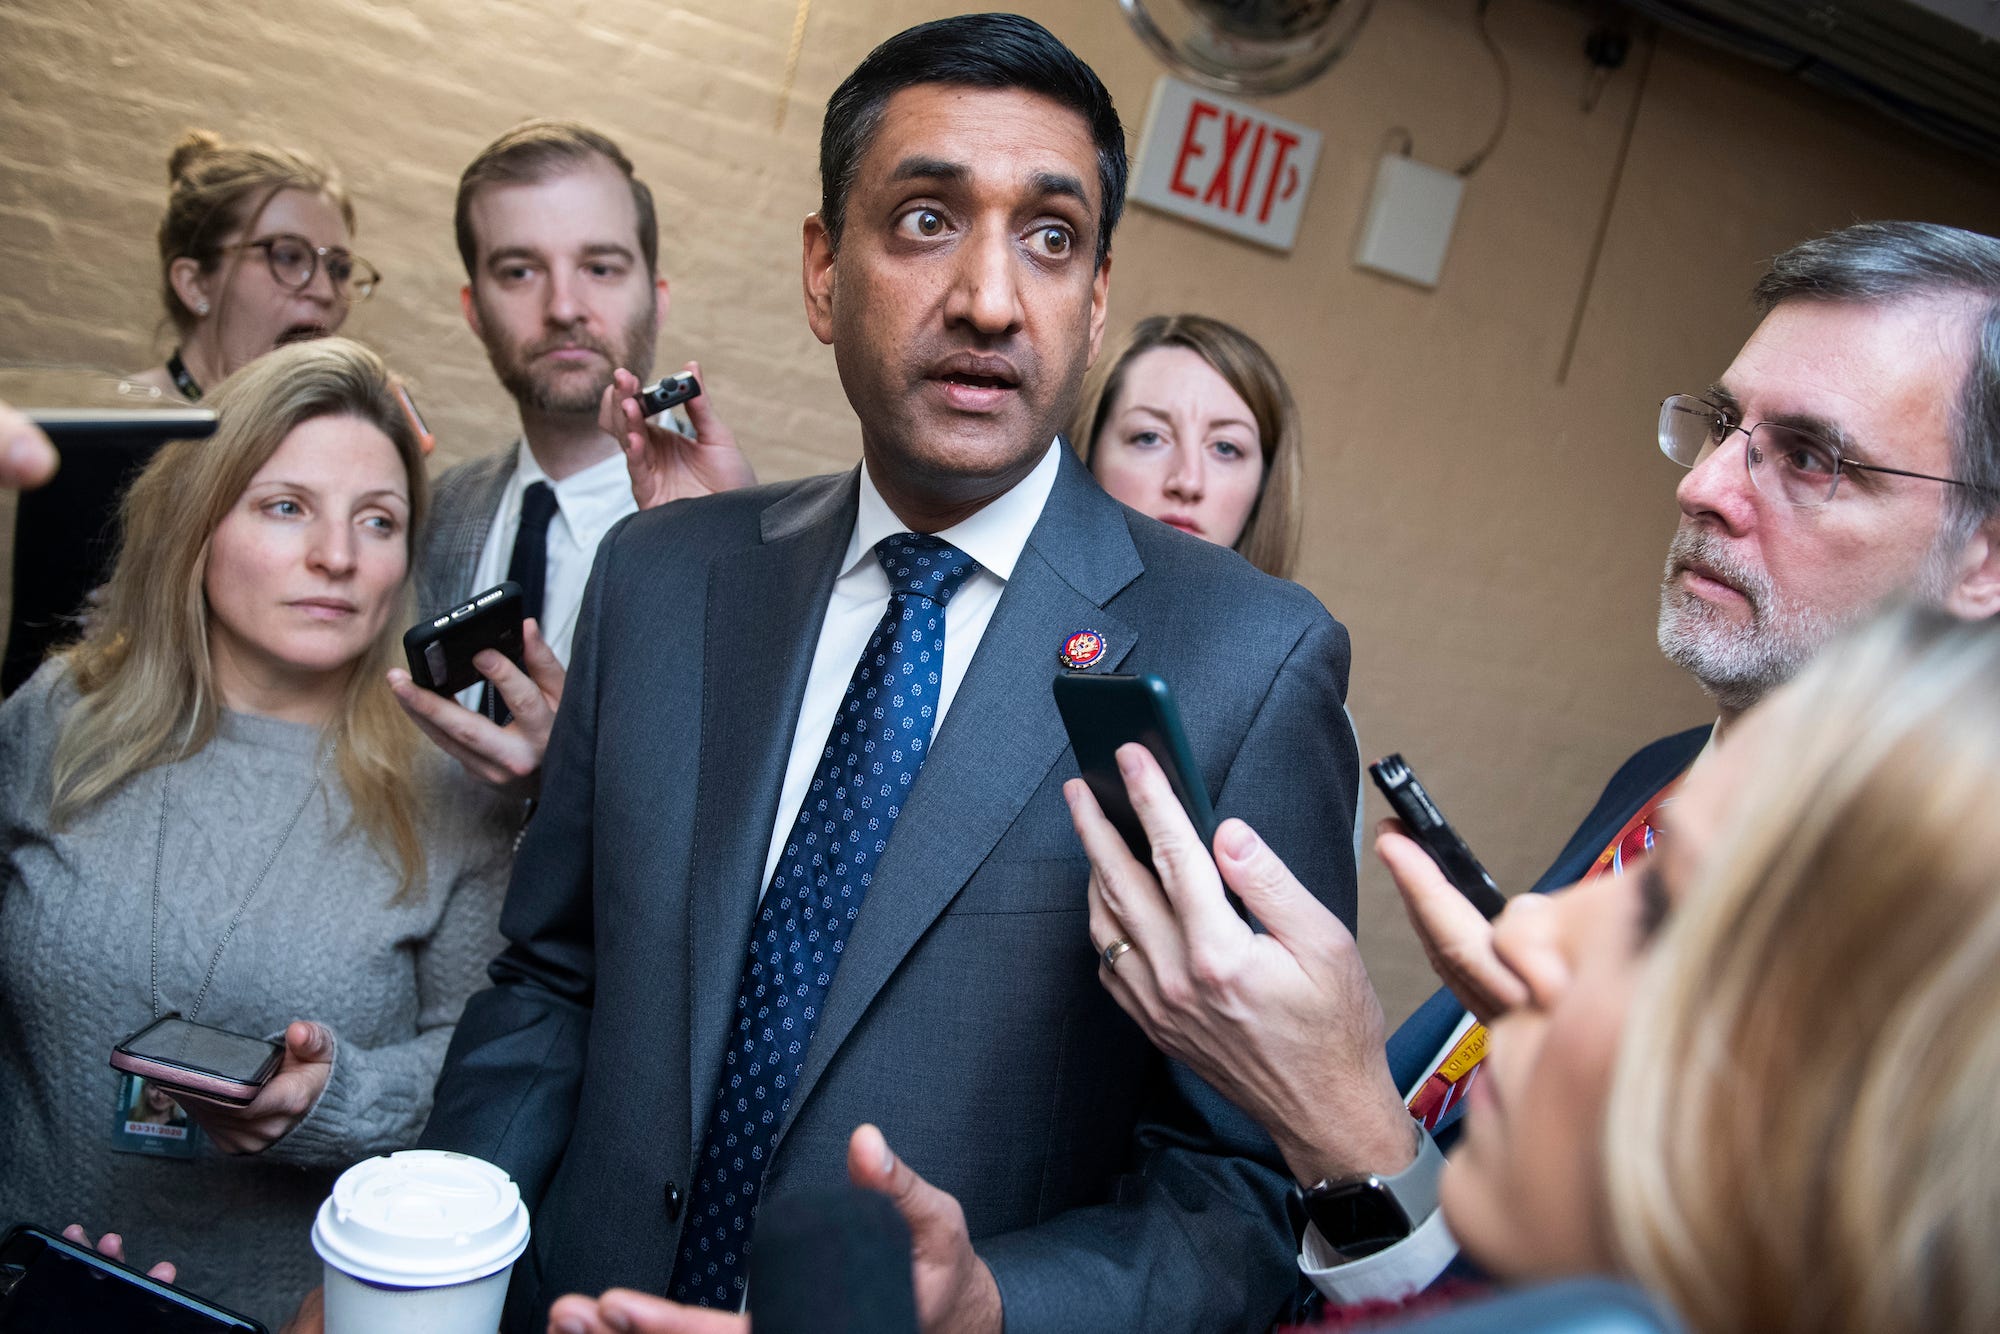 Rep. Ro Khanna, wearing a dark suit, answers questions from the crowd of reporters gathered all around him in one of the many tunnels beneath the US Capitol.